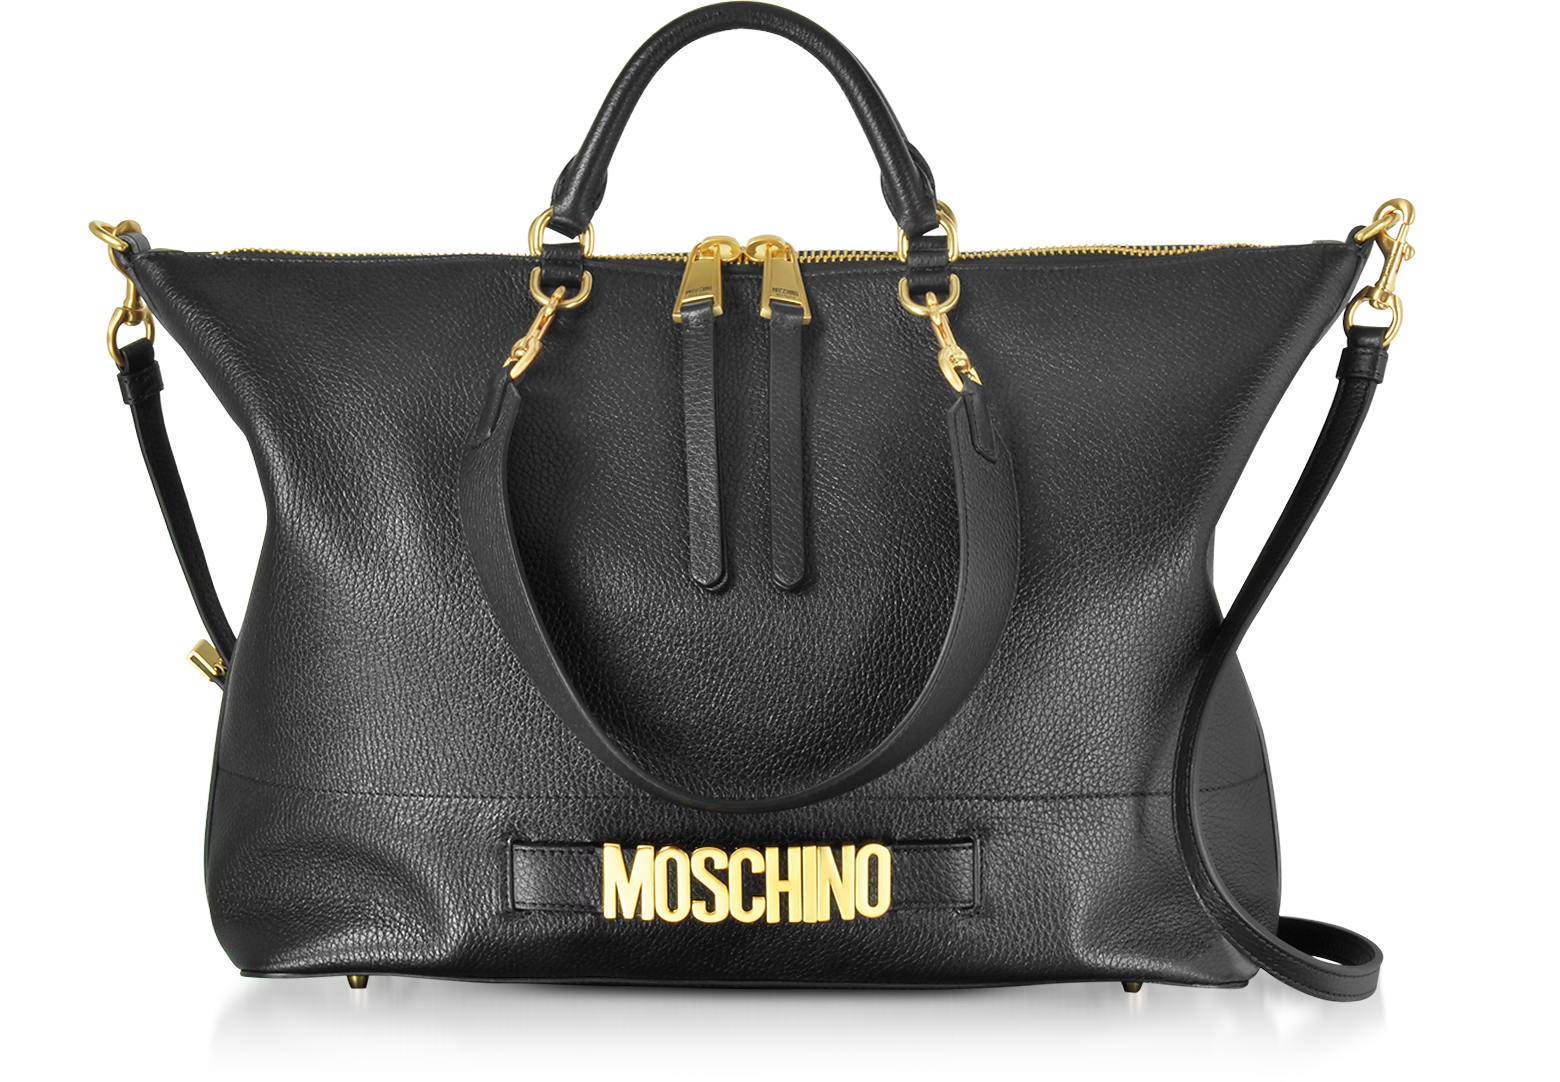 Moschino Black Leather Tote Bag w 